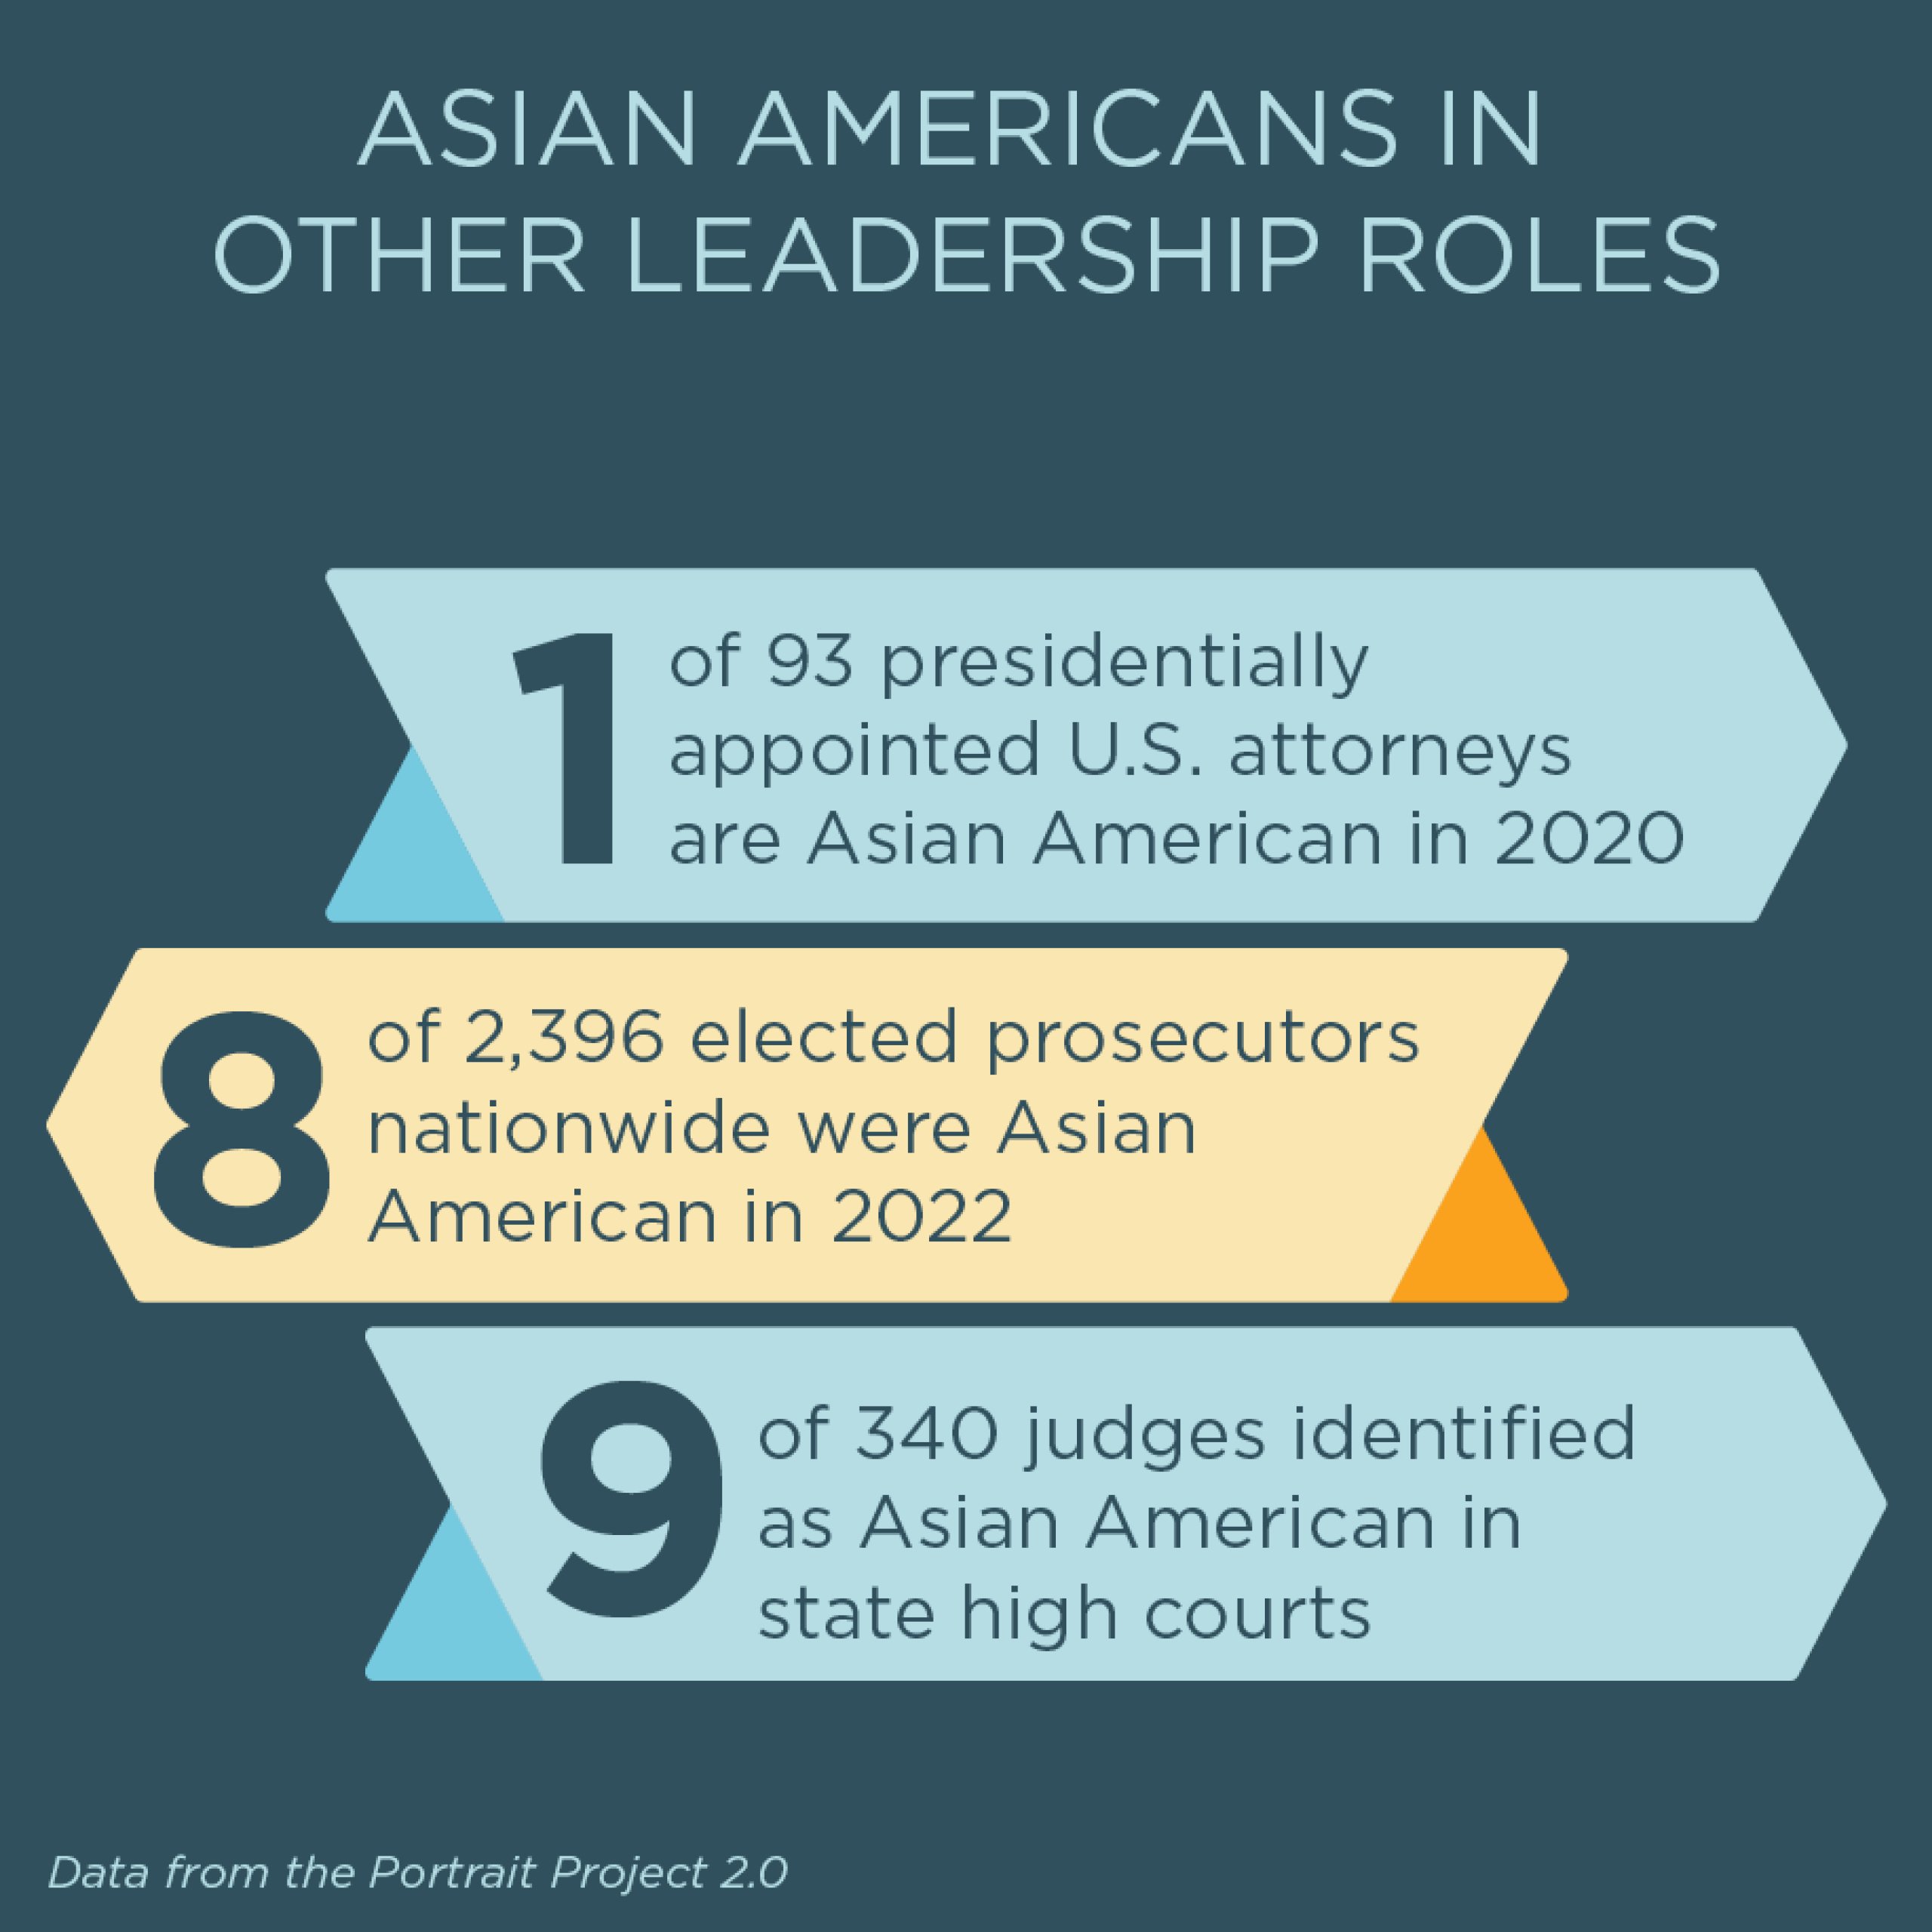 Asian Americans in other leadership roles